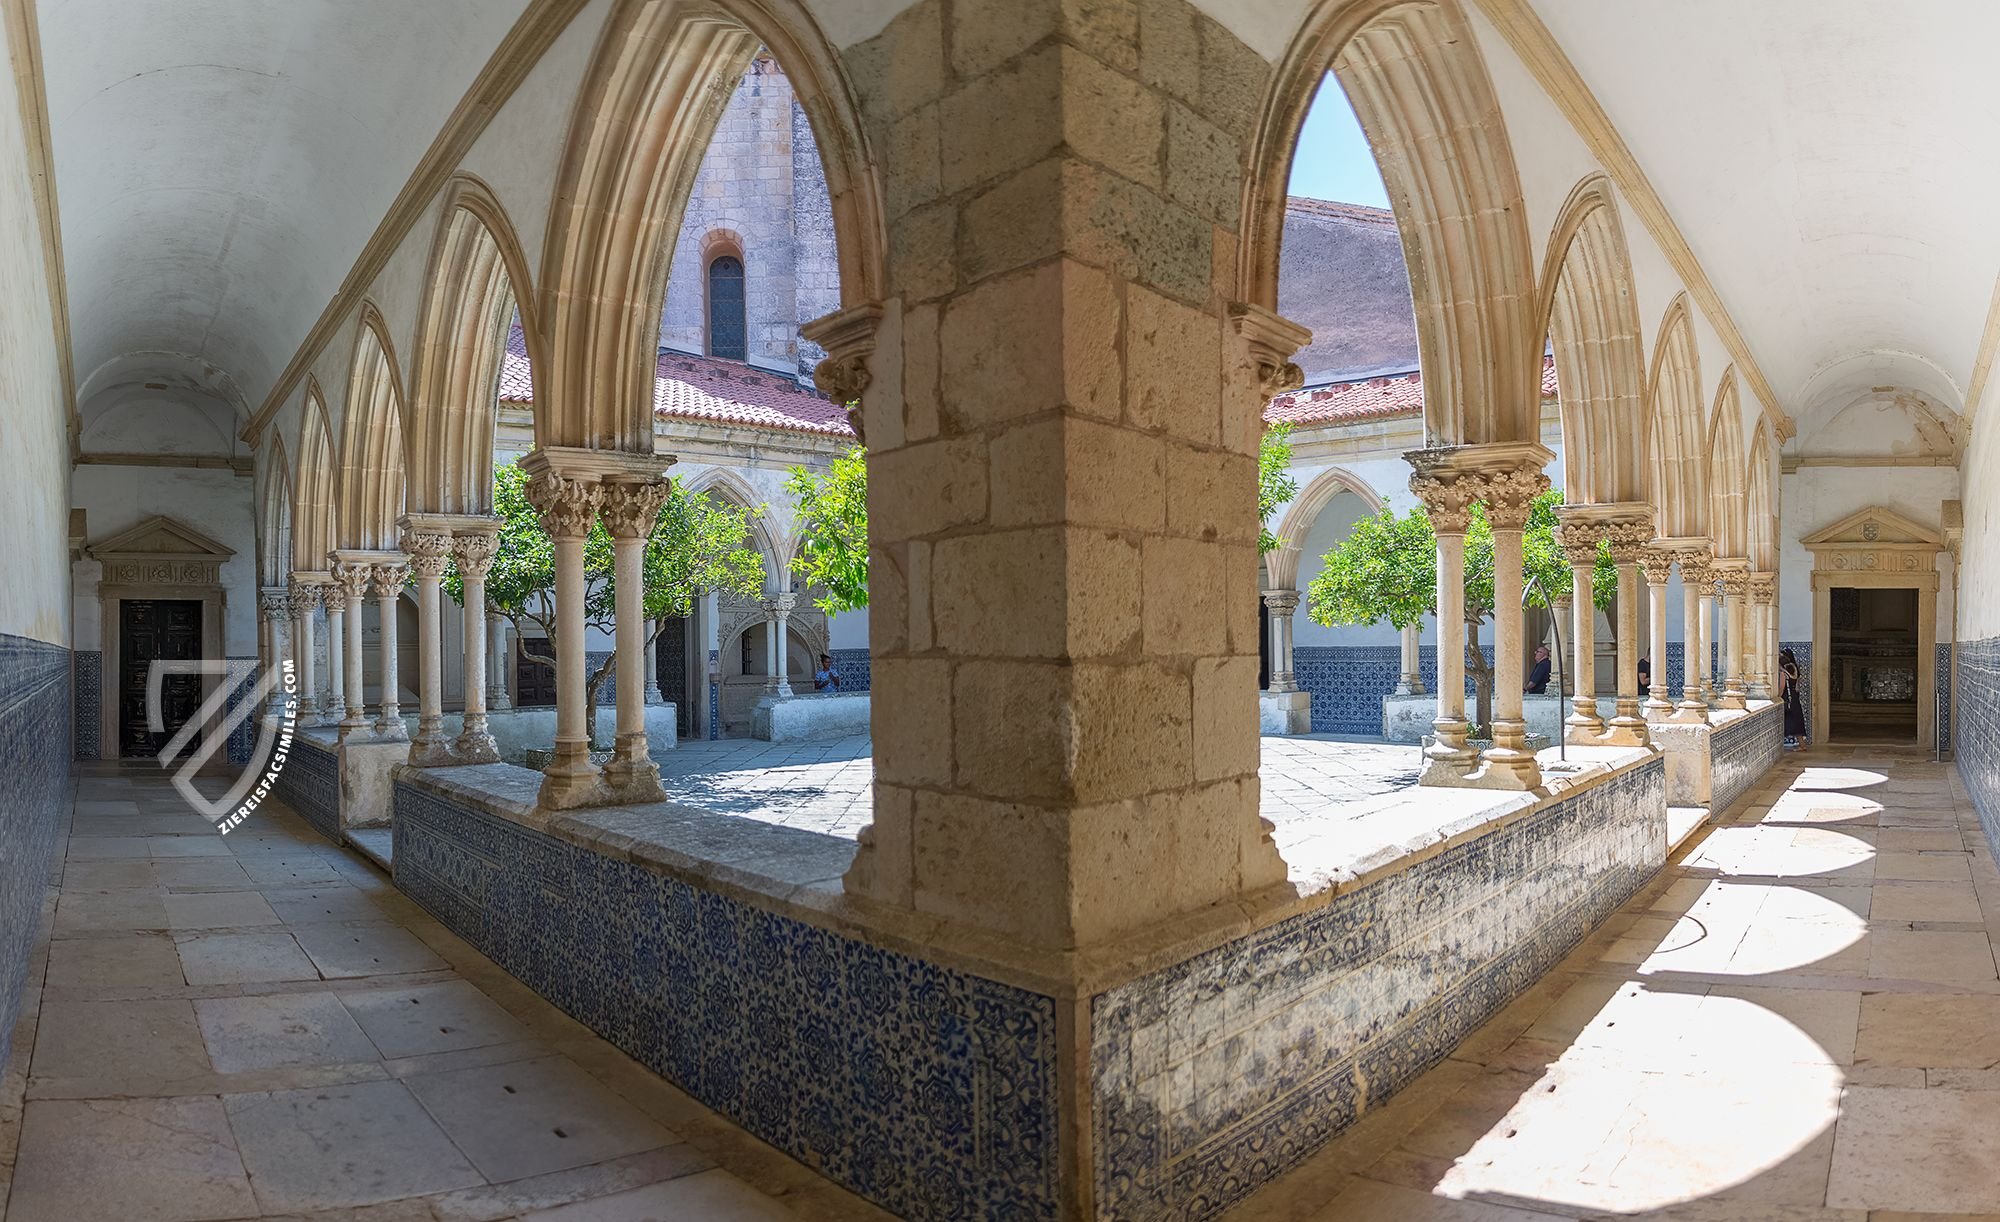 The Convent of Christ in Tomar - cloister (Source: iStock/Nuno)